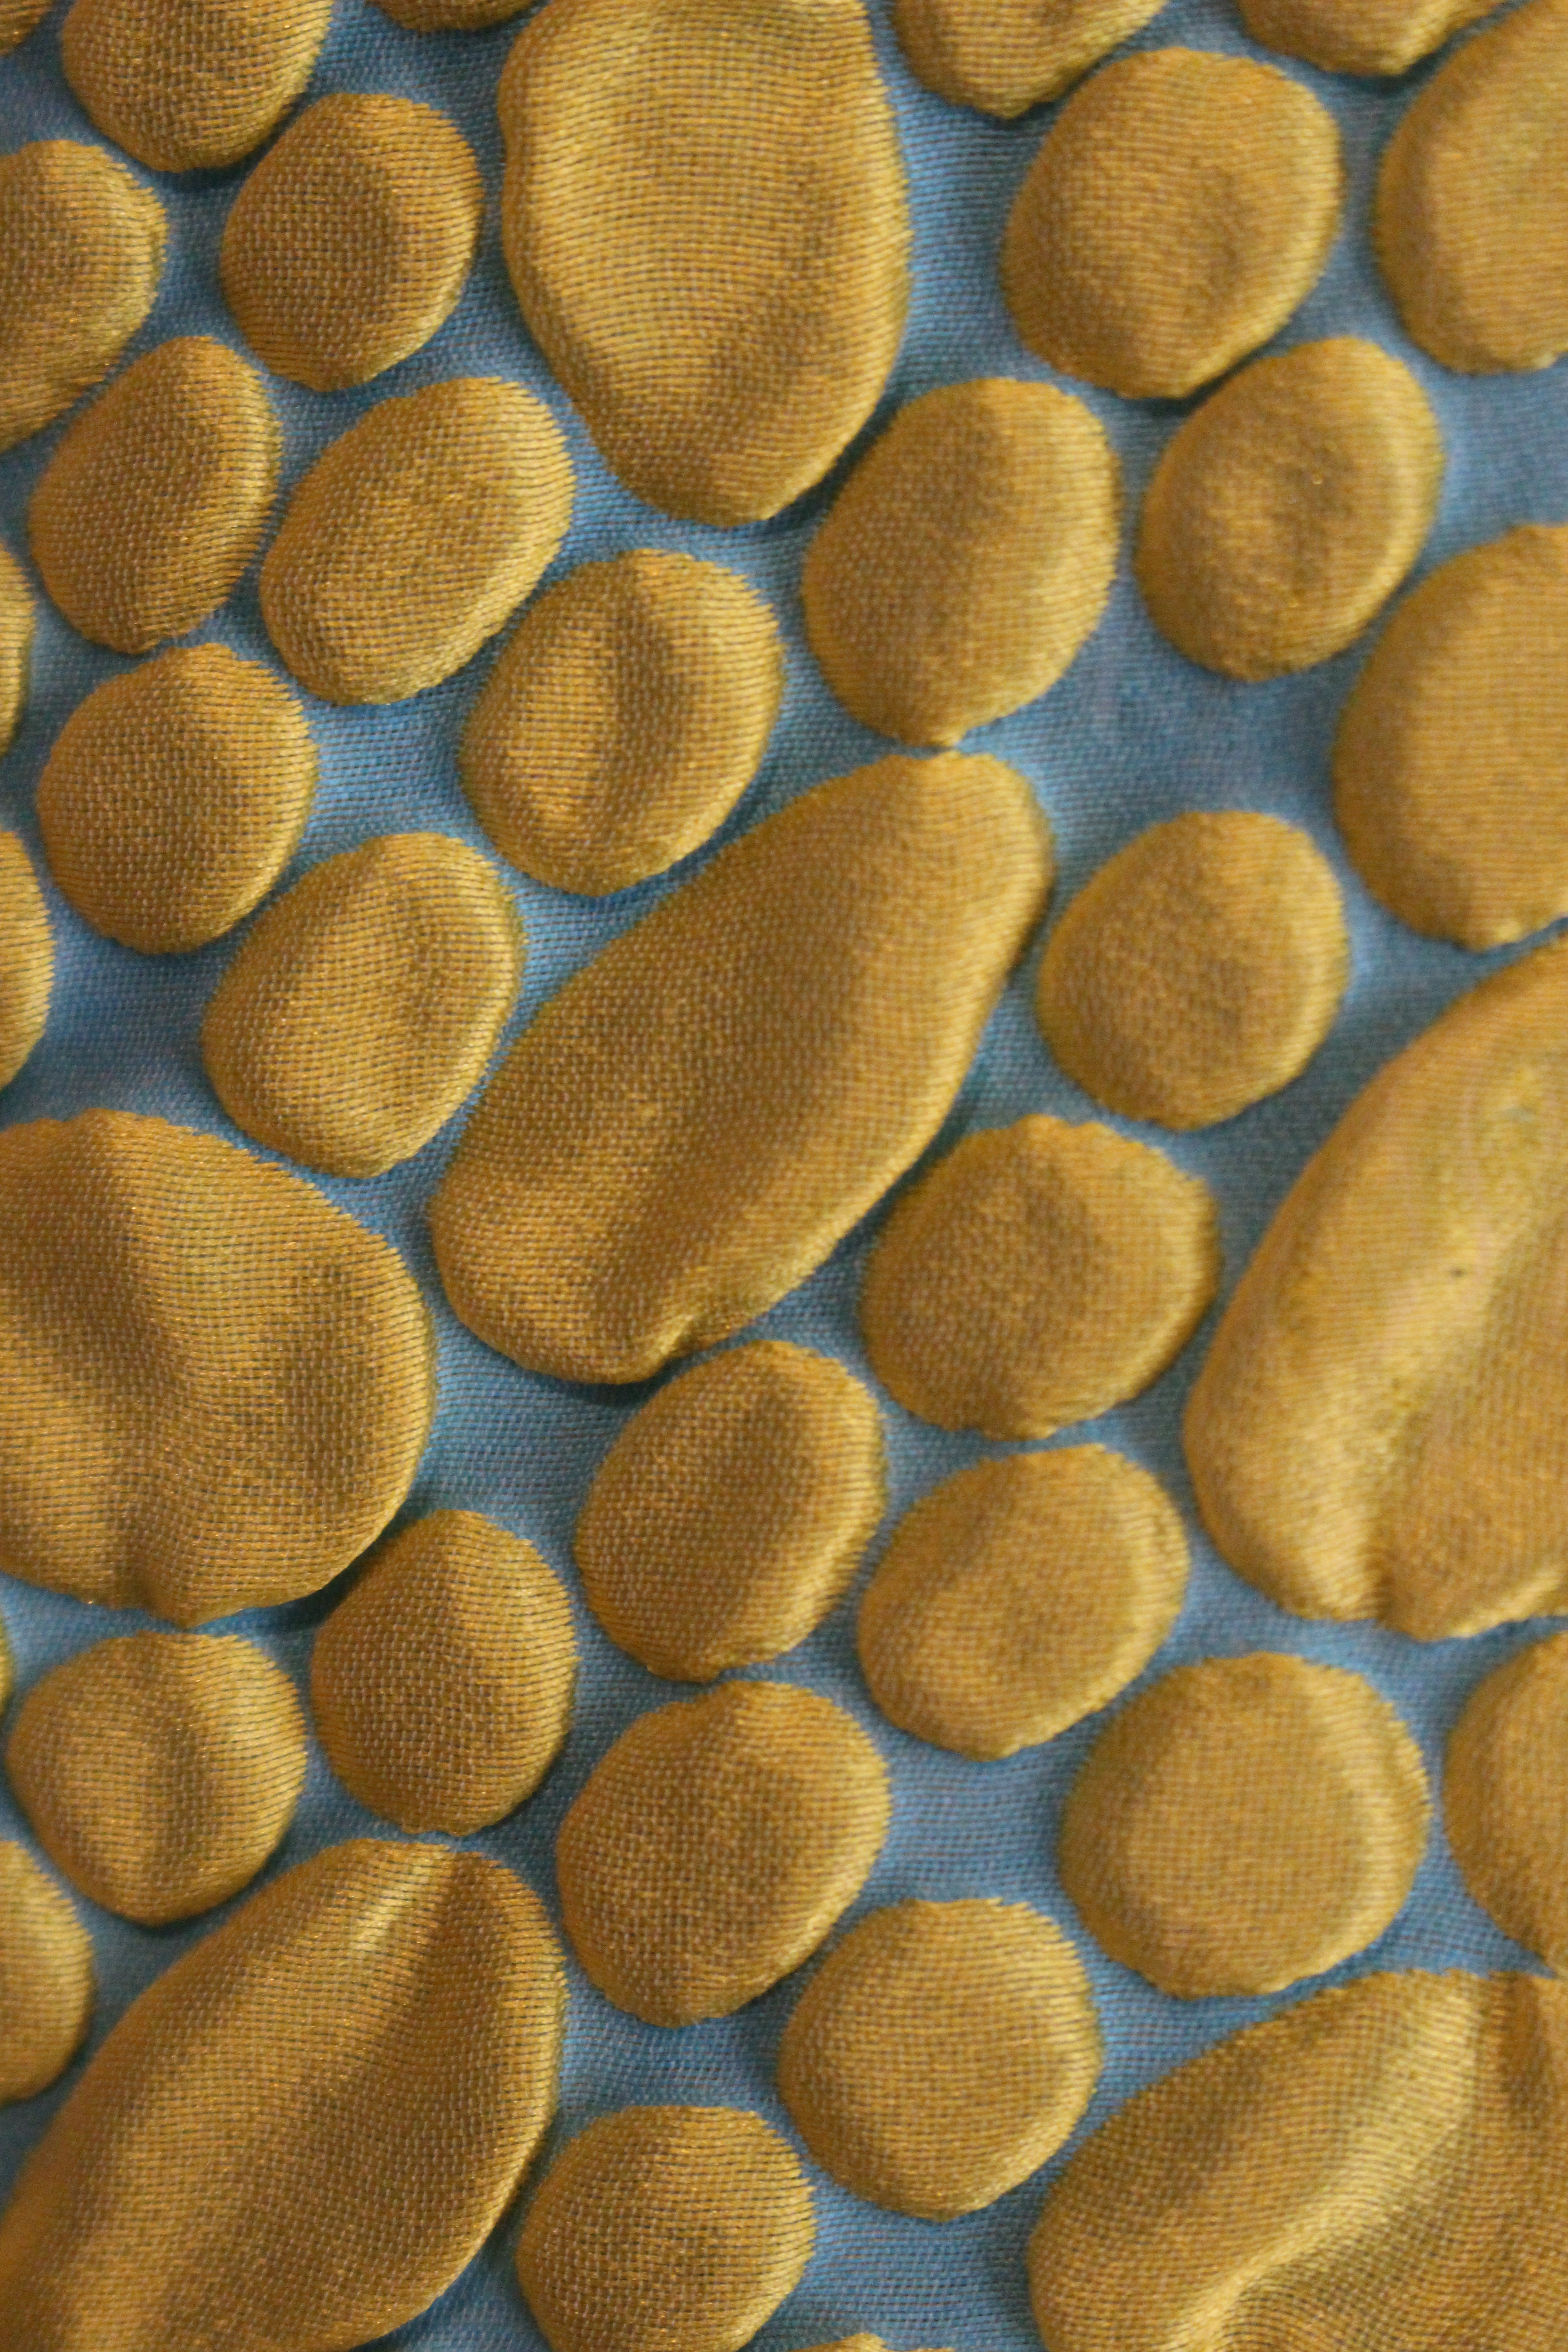 Agnes b blue cropped jacket with yellow bubbles, showing detail of 
bubbles